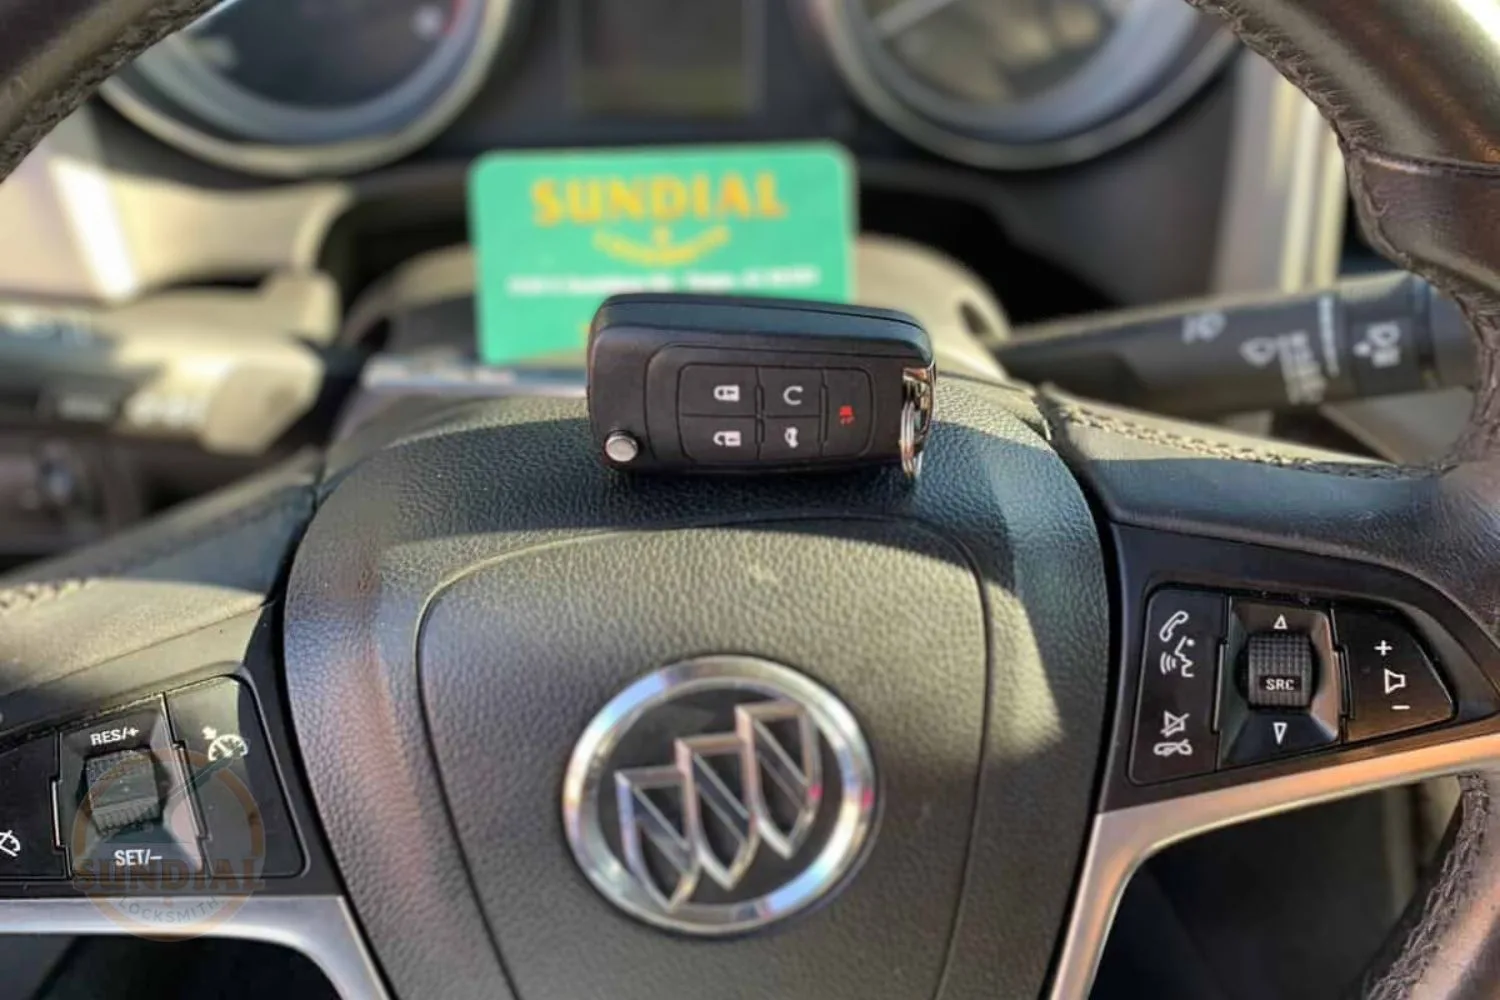 Buick car key fob held in front of the steering wheel with the Sundial Locksmith business card displayed behind it.